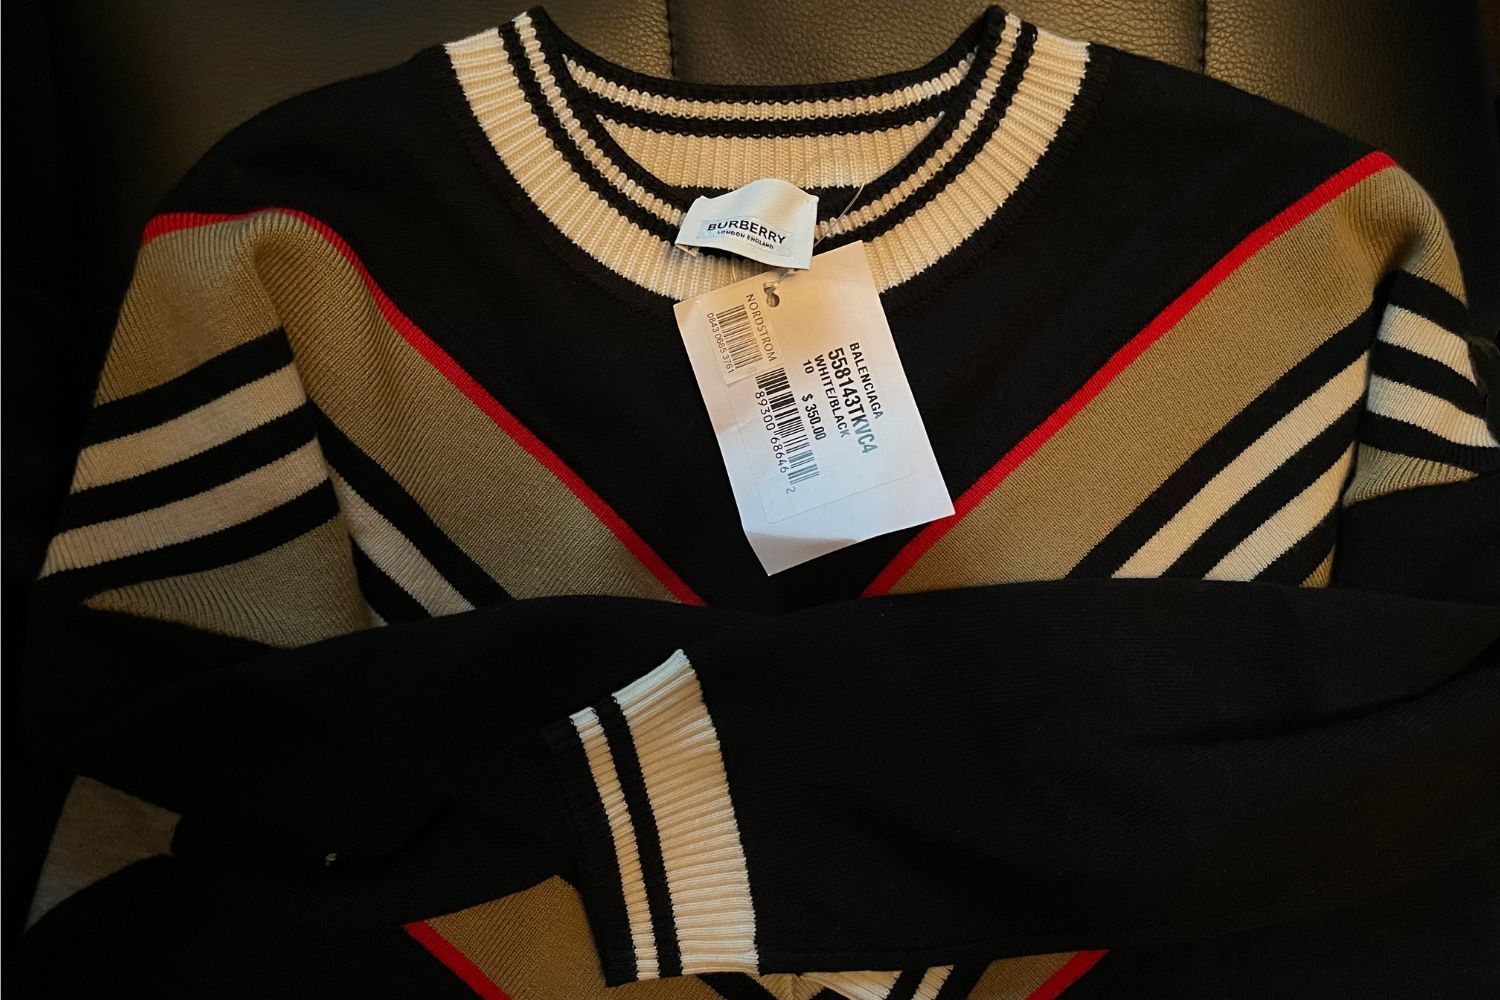 Nordstrom bar code sticker on Balenenciga hang tag (it's obviously a Burberry sweater, so liquidation includes error-marked items)